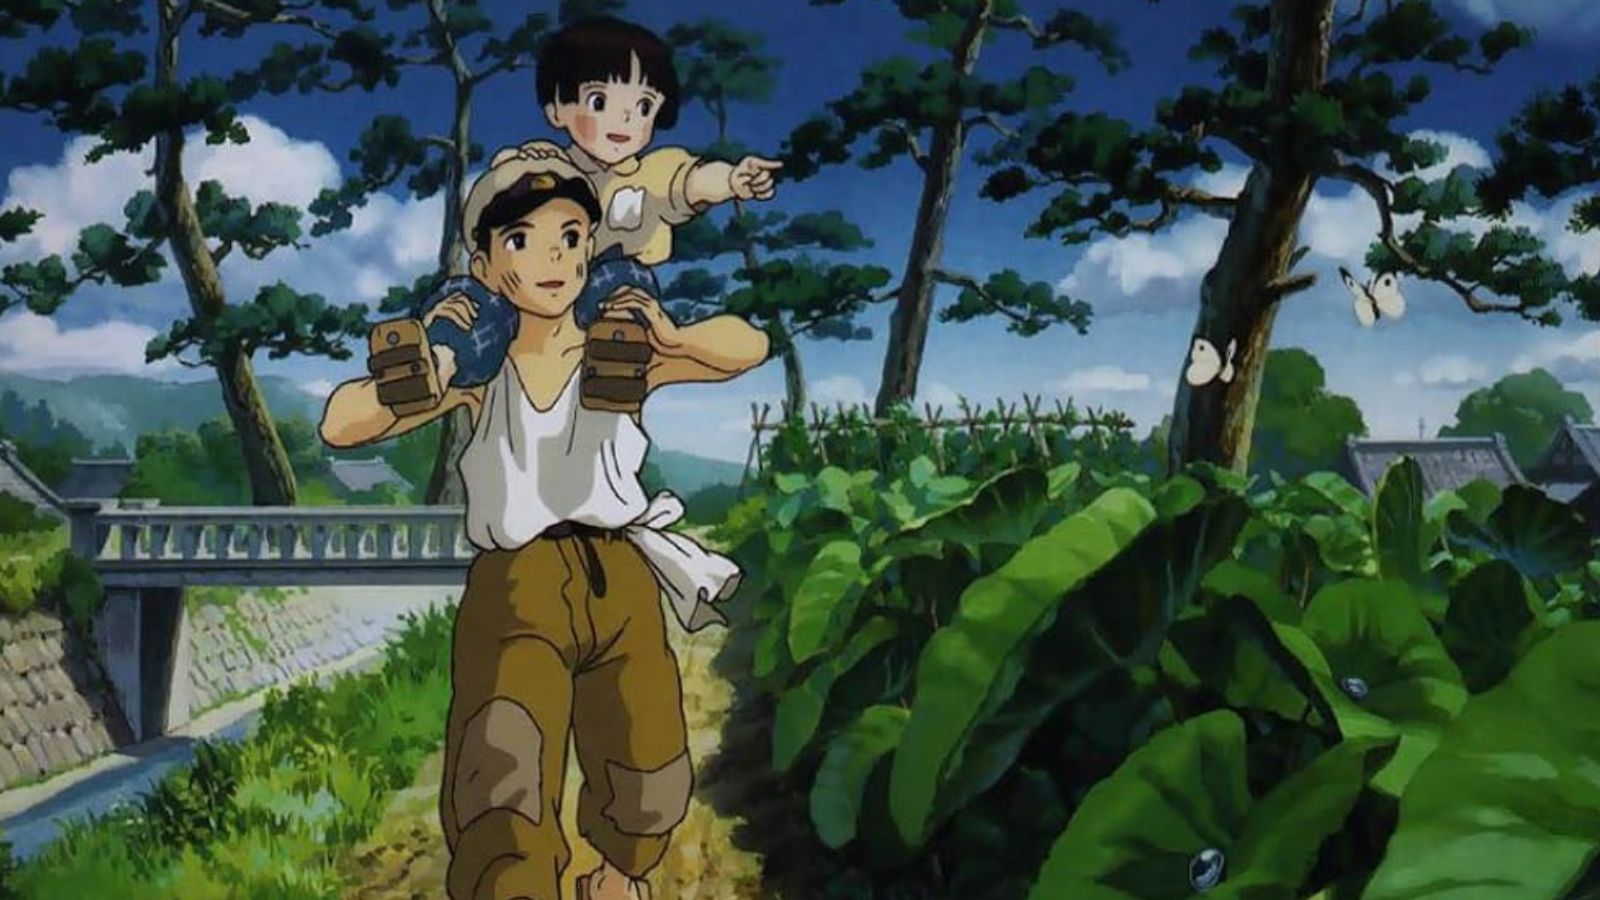 <p>Any movie that revolves around children can be emotional. Add the realities of war and the impact of the film increases. That’s what makes “Grave of Fireflies” so intense. It looks at the vulnerability of two siblings as they go through suffering and loss during World War 2</p>